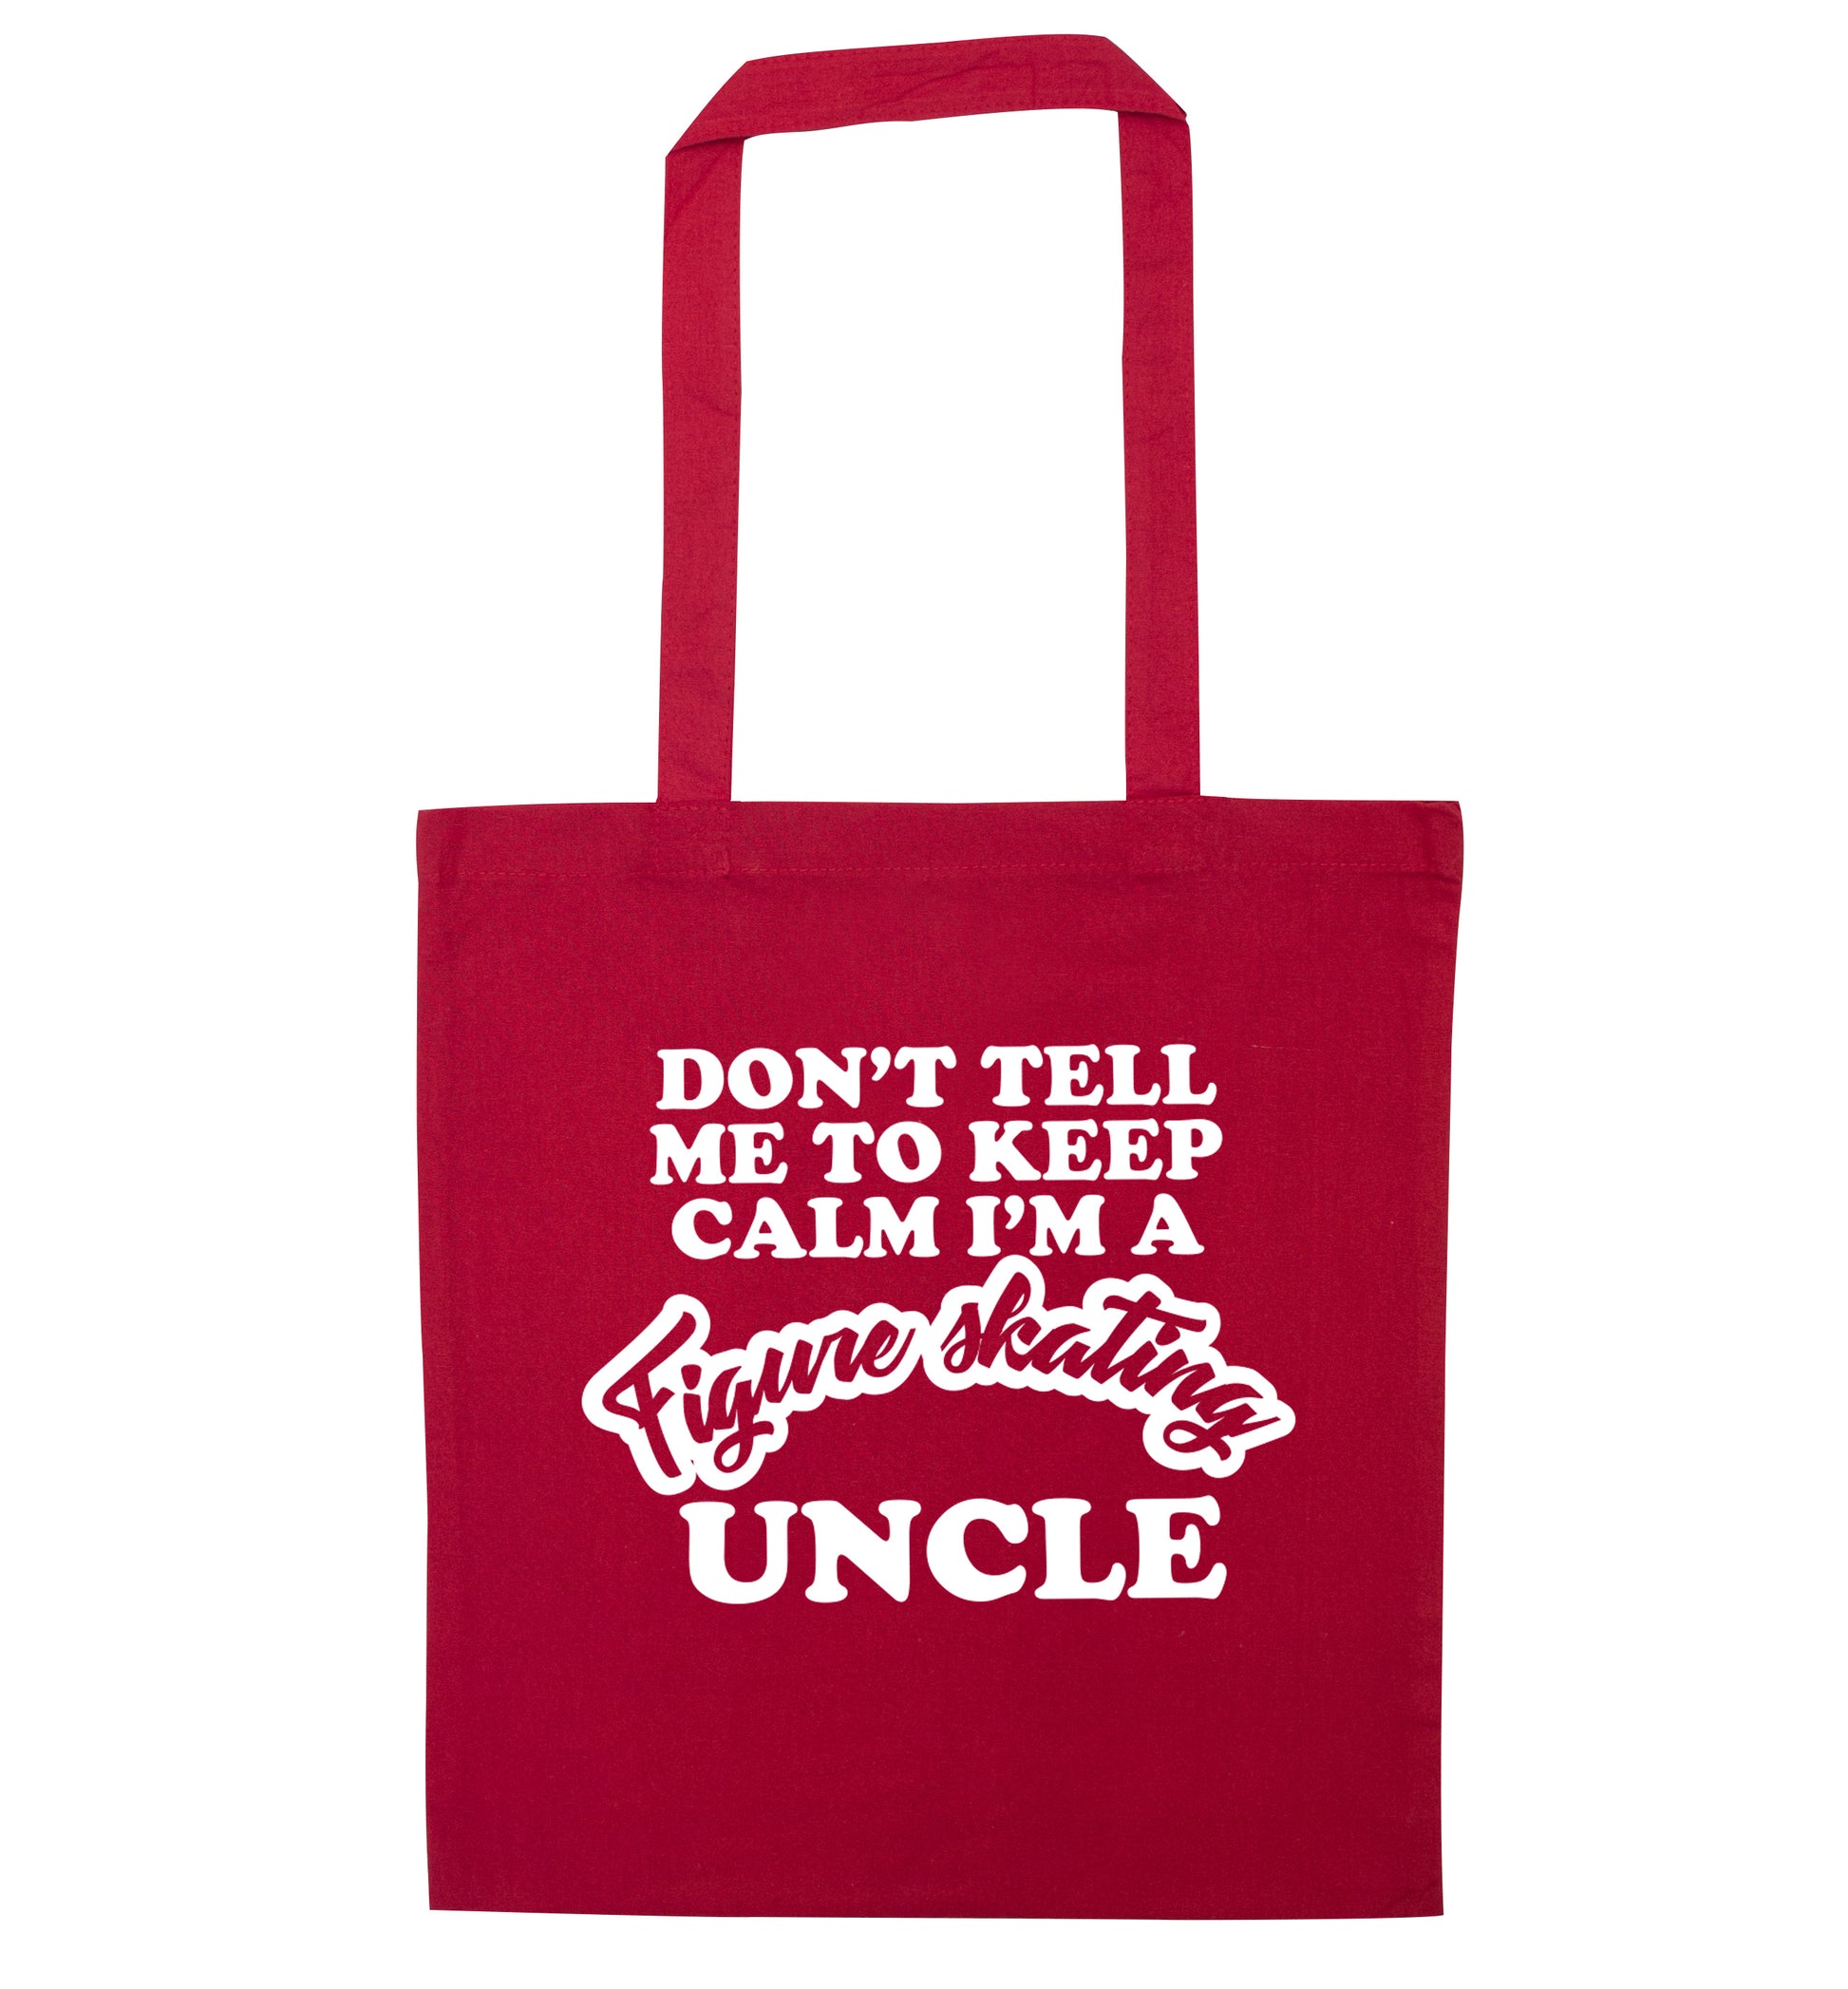 Don't tell me to keep calm I'm a figure skating uncle red tote bag